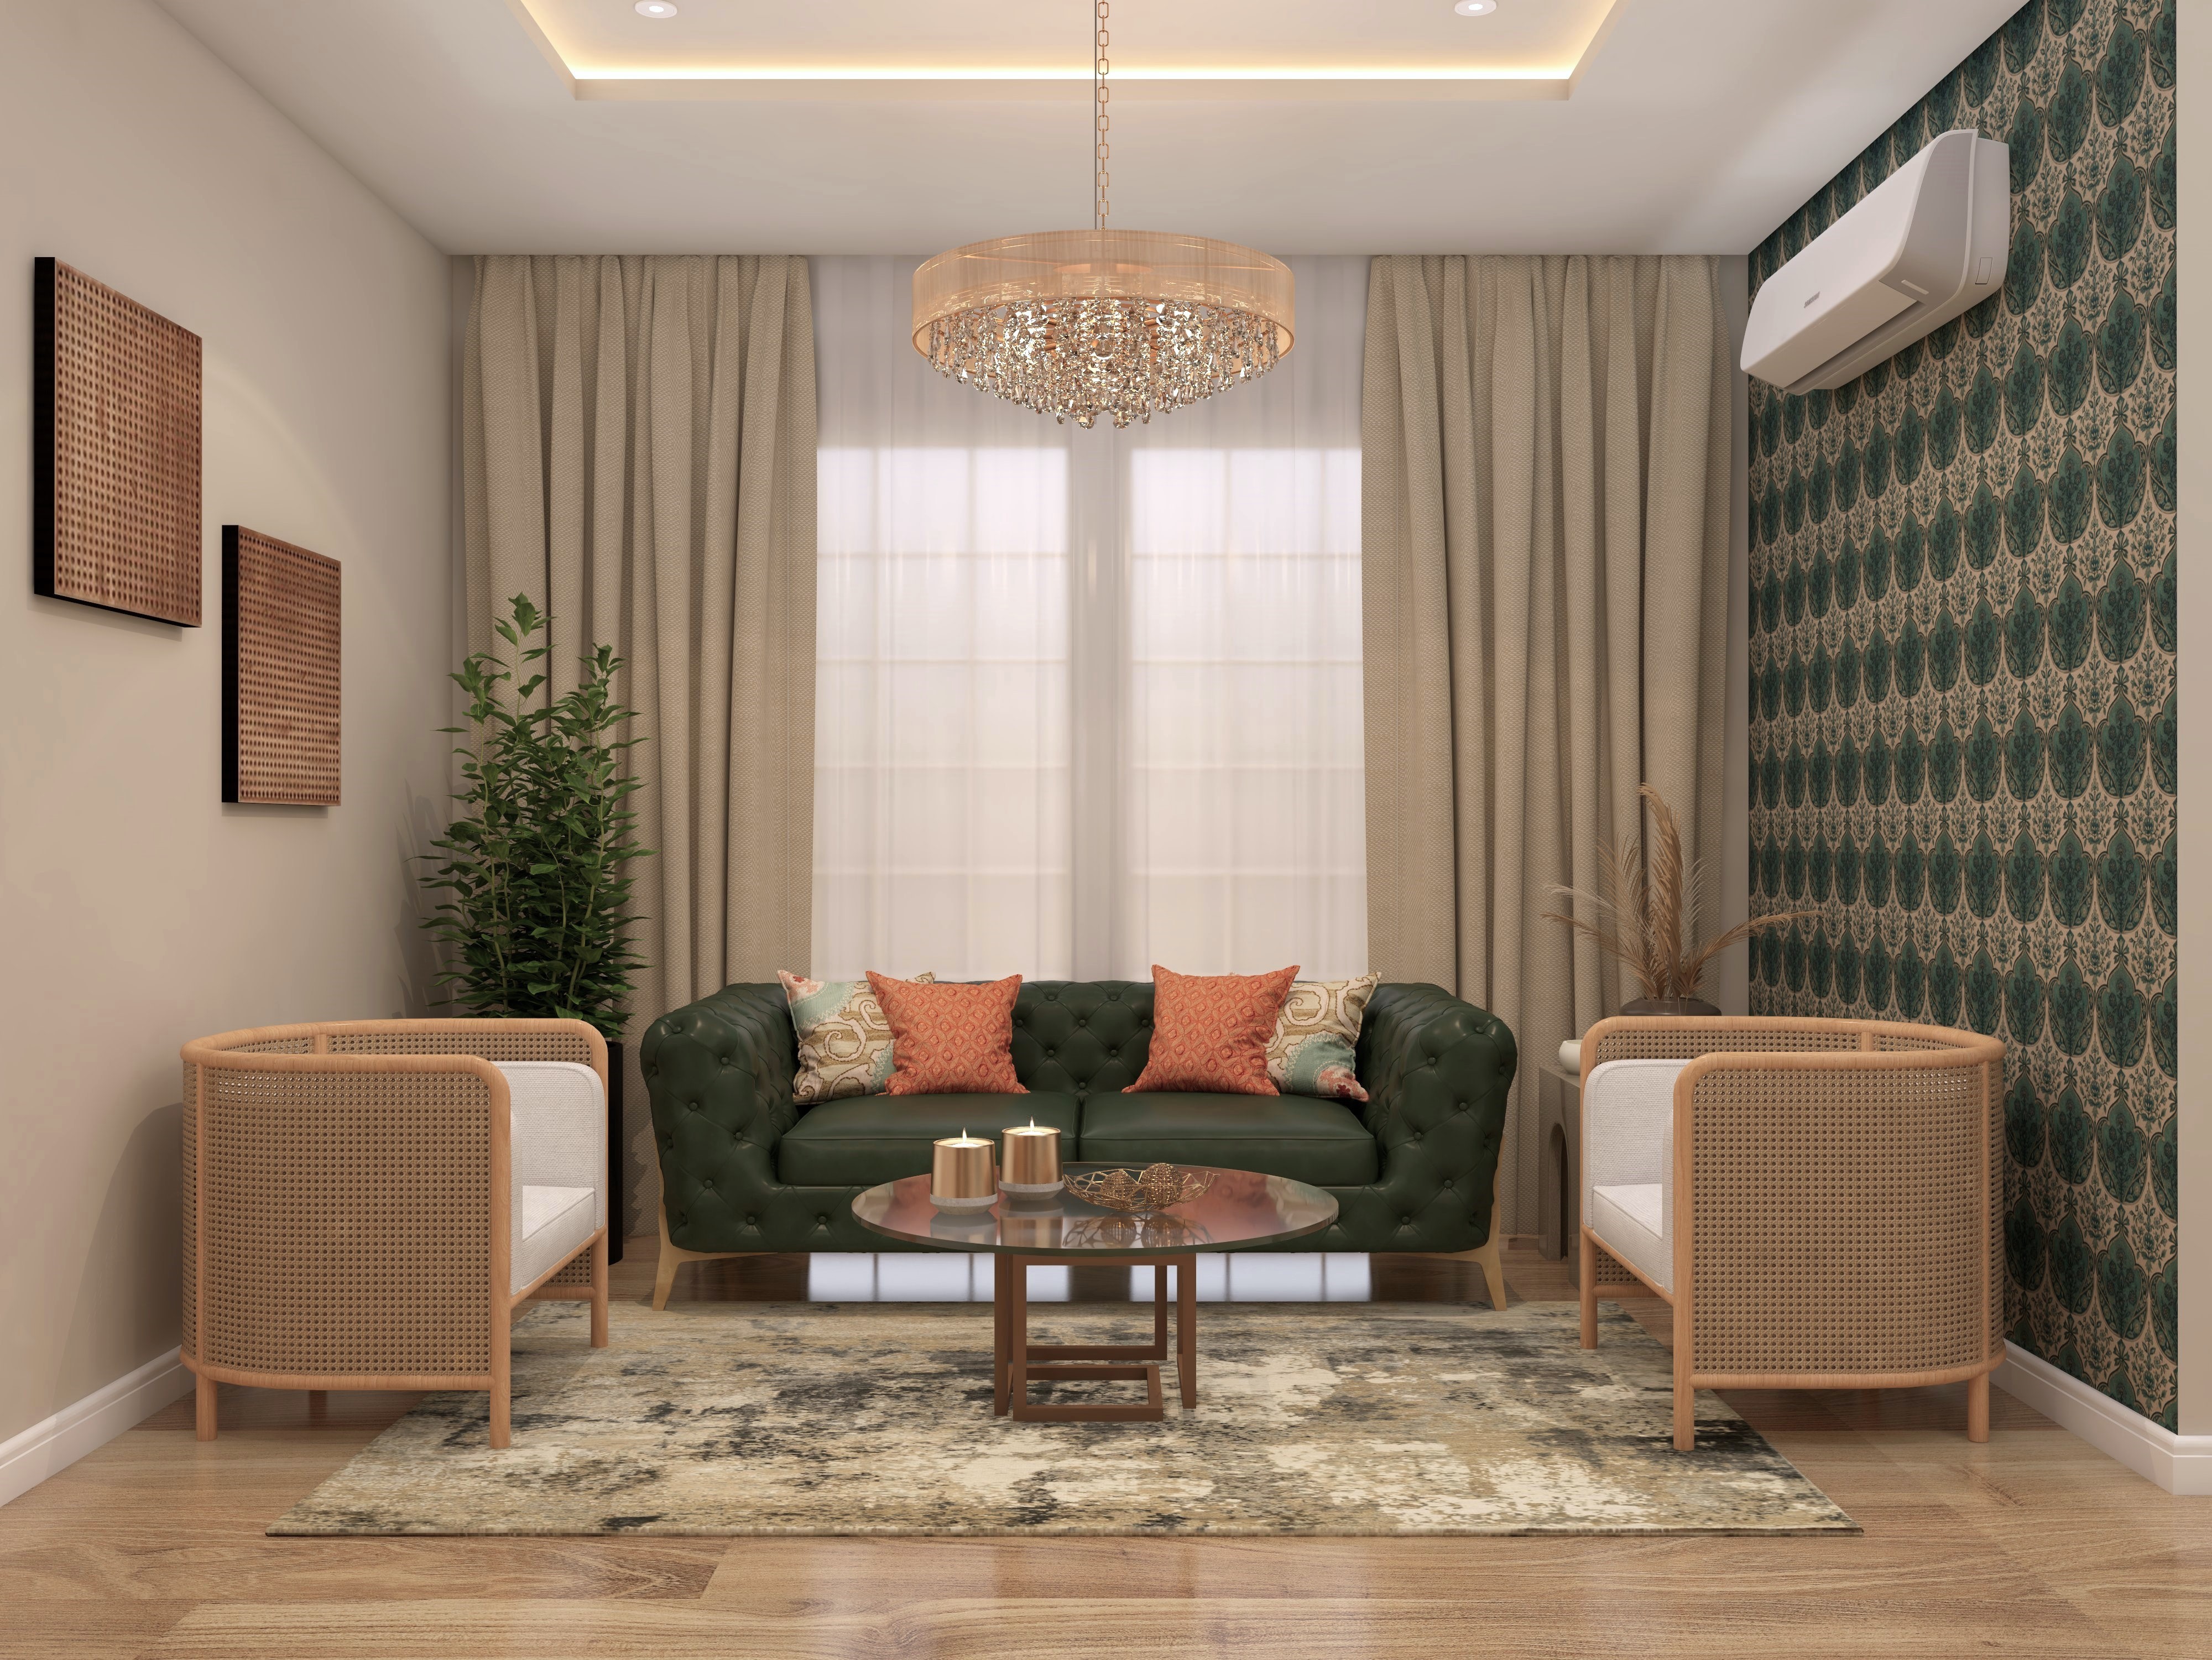 Modern Indian living room with Nilaya wallpaper and white teak chandelier - Beautiful Homes